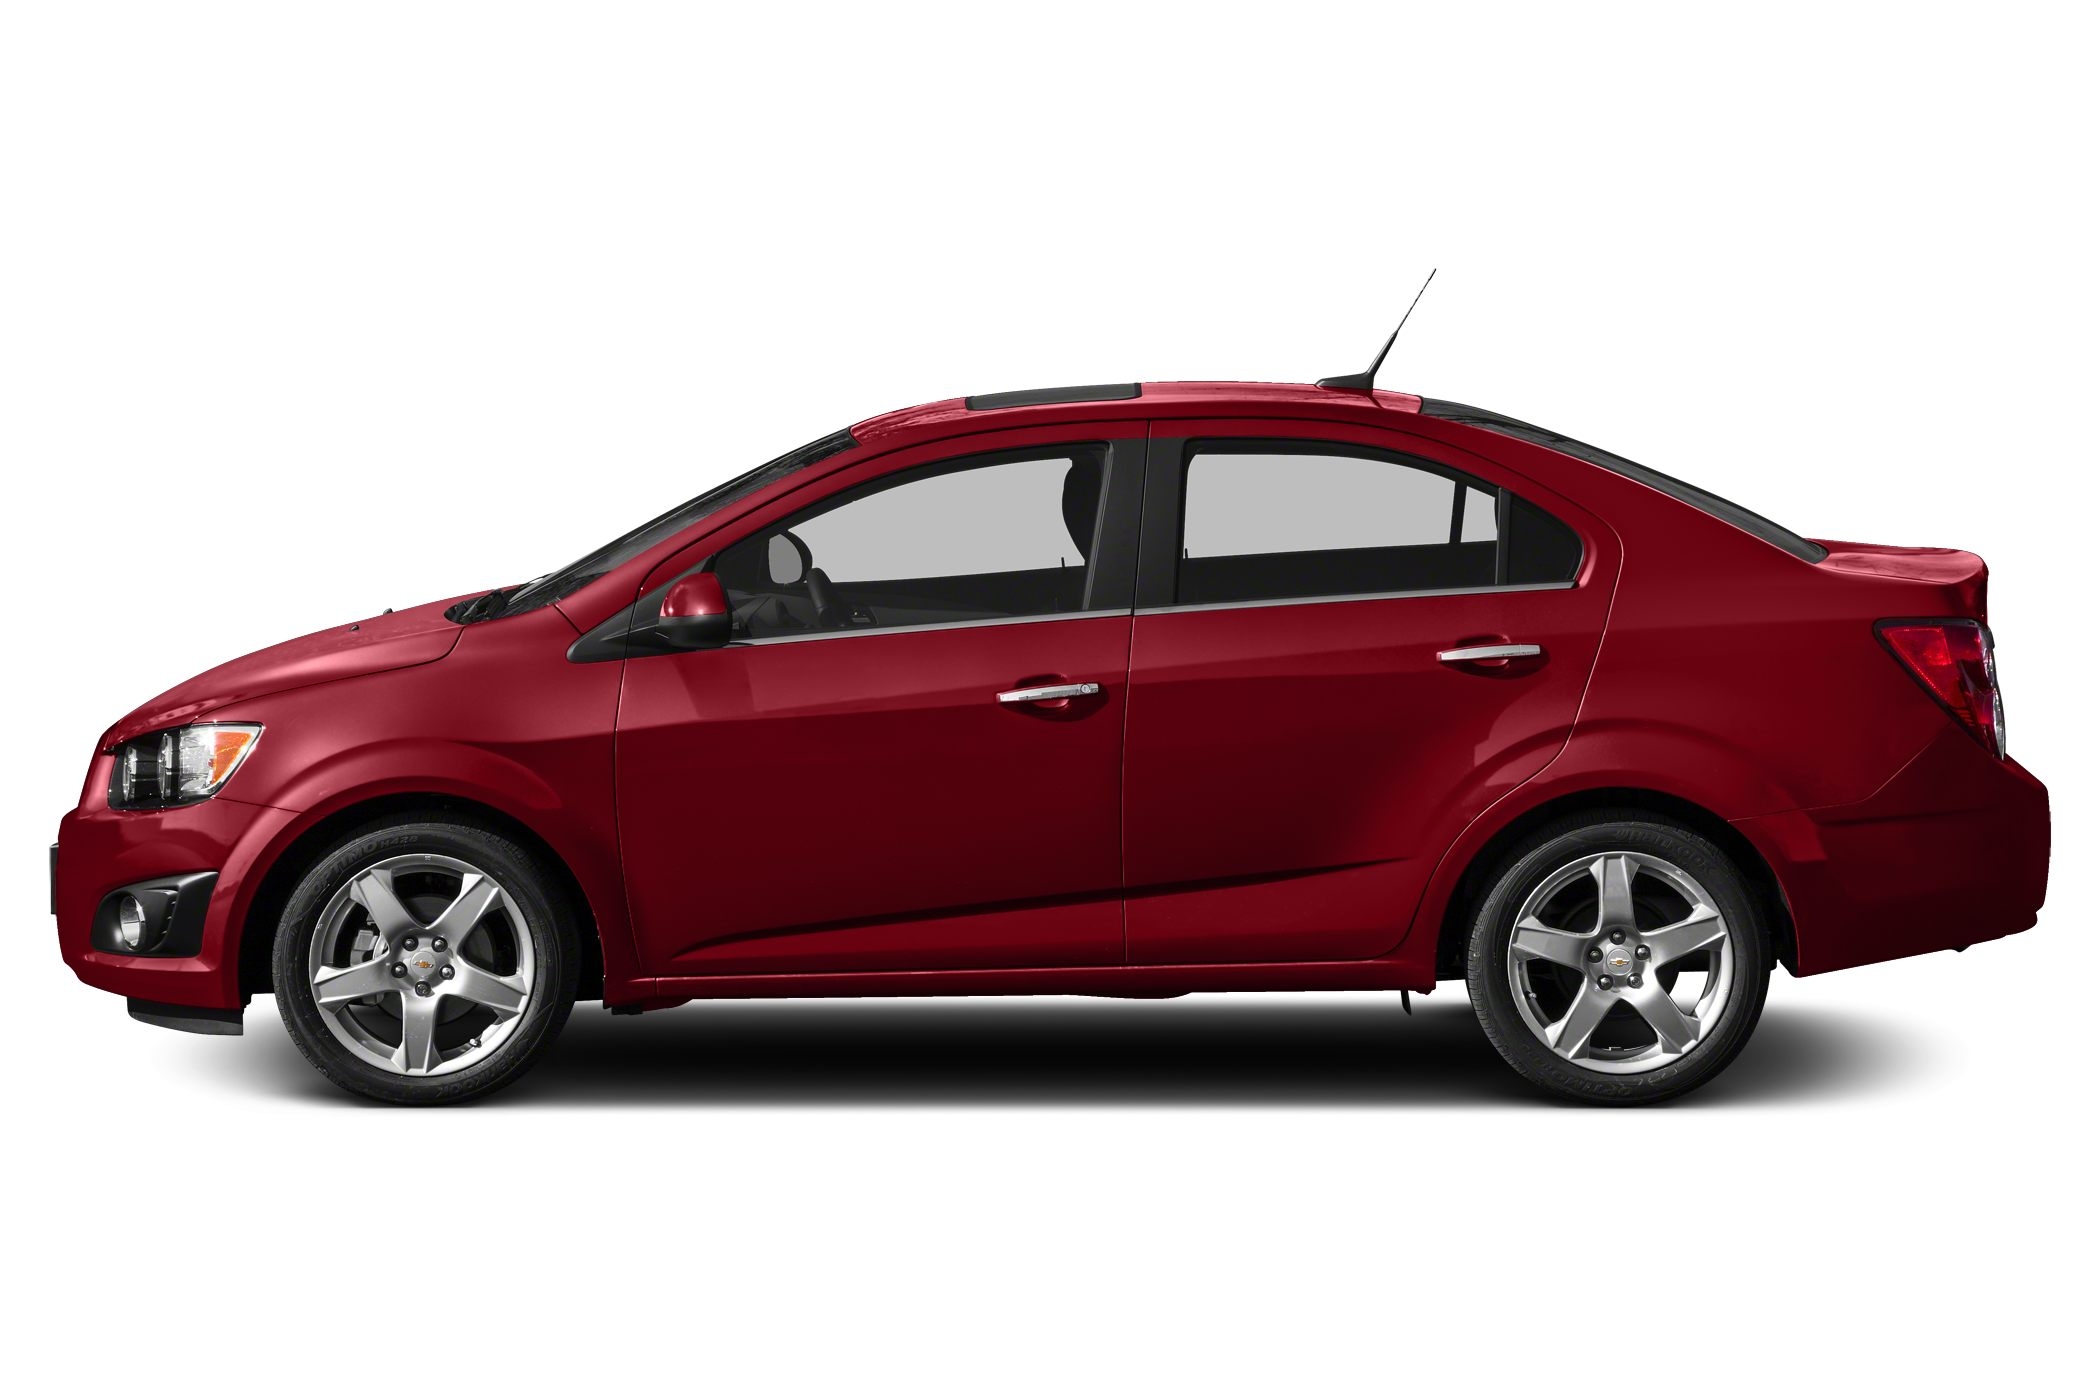 new 2016 chevrolet sonic invoice price chevrolet sonic 2016 finding invoice price on new cars